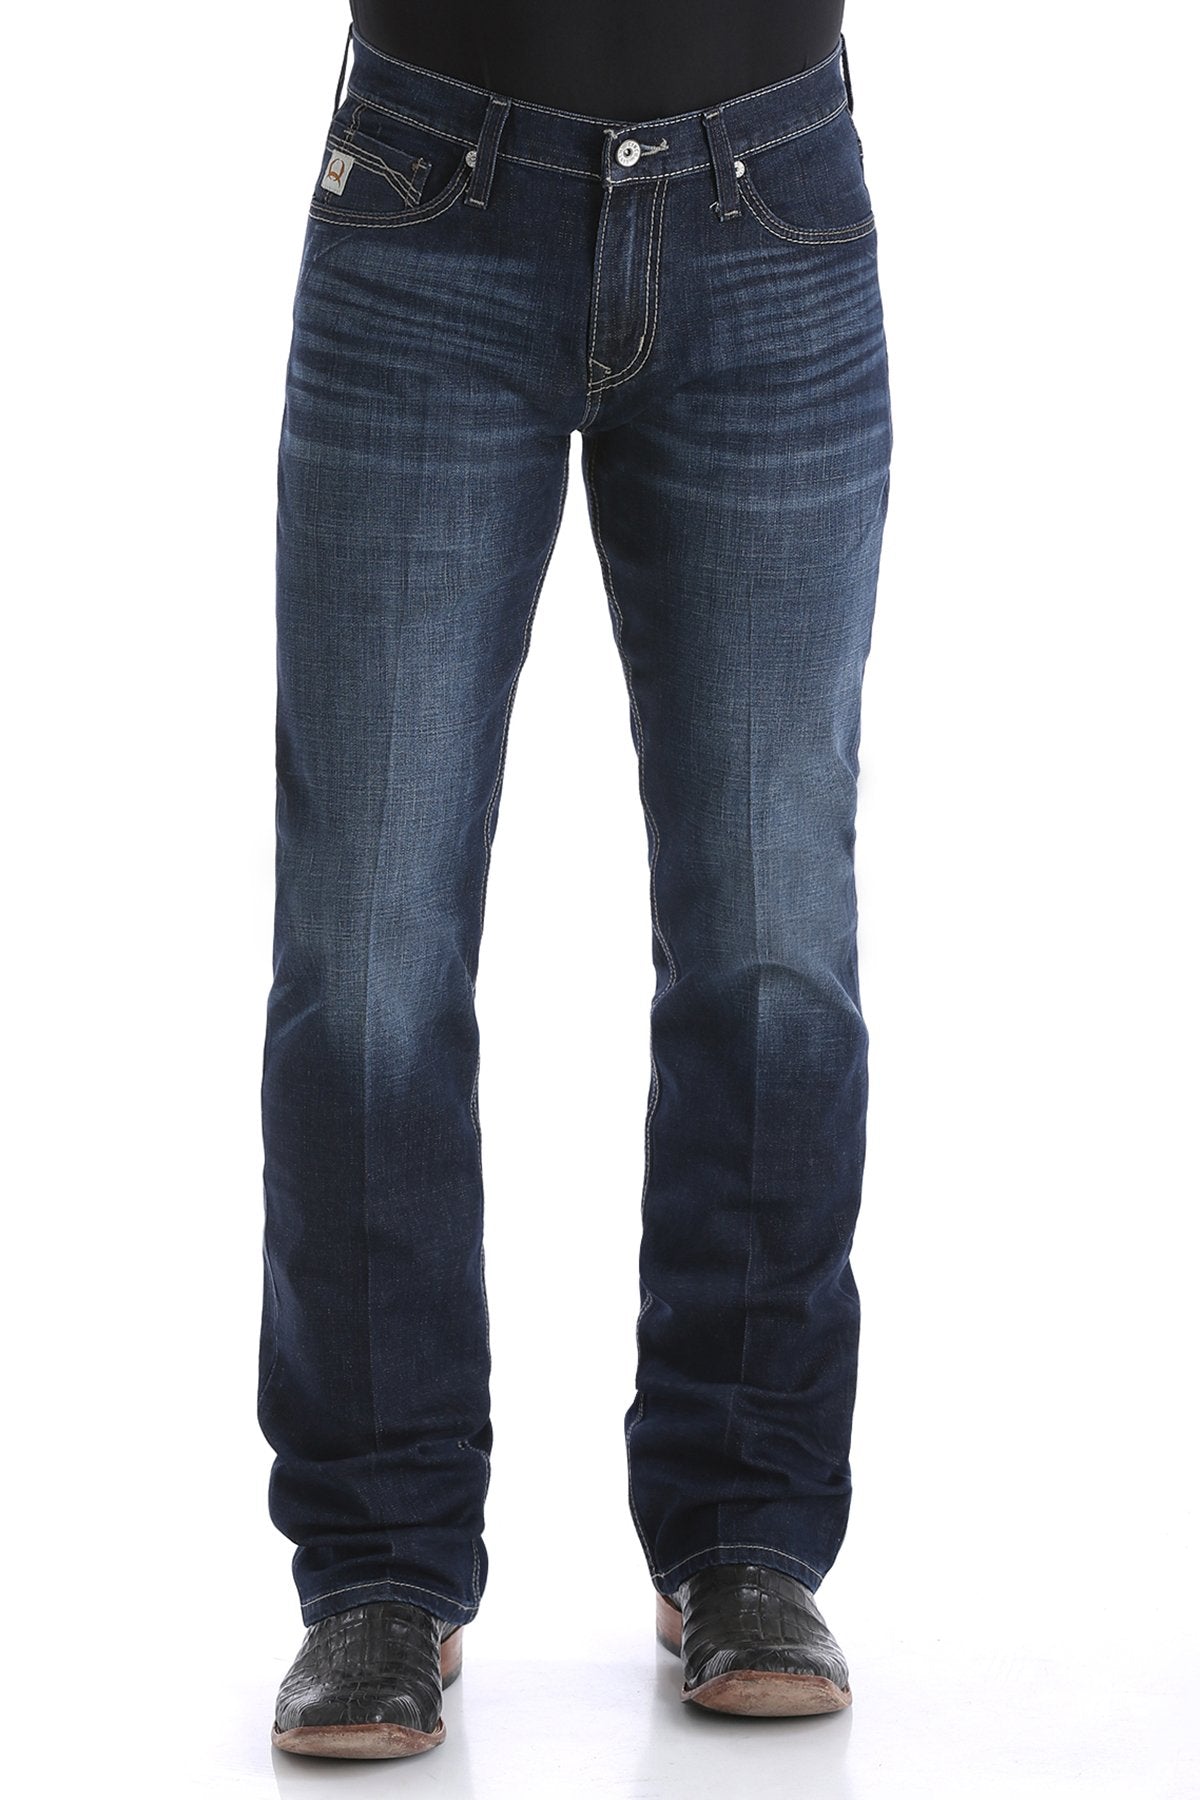 Wrangler Men's Relaxed Fit Boot Cut jeans – Leanin' Pole Arena